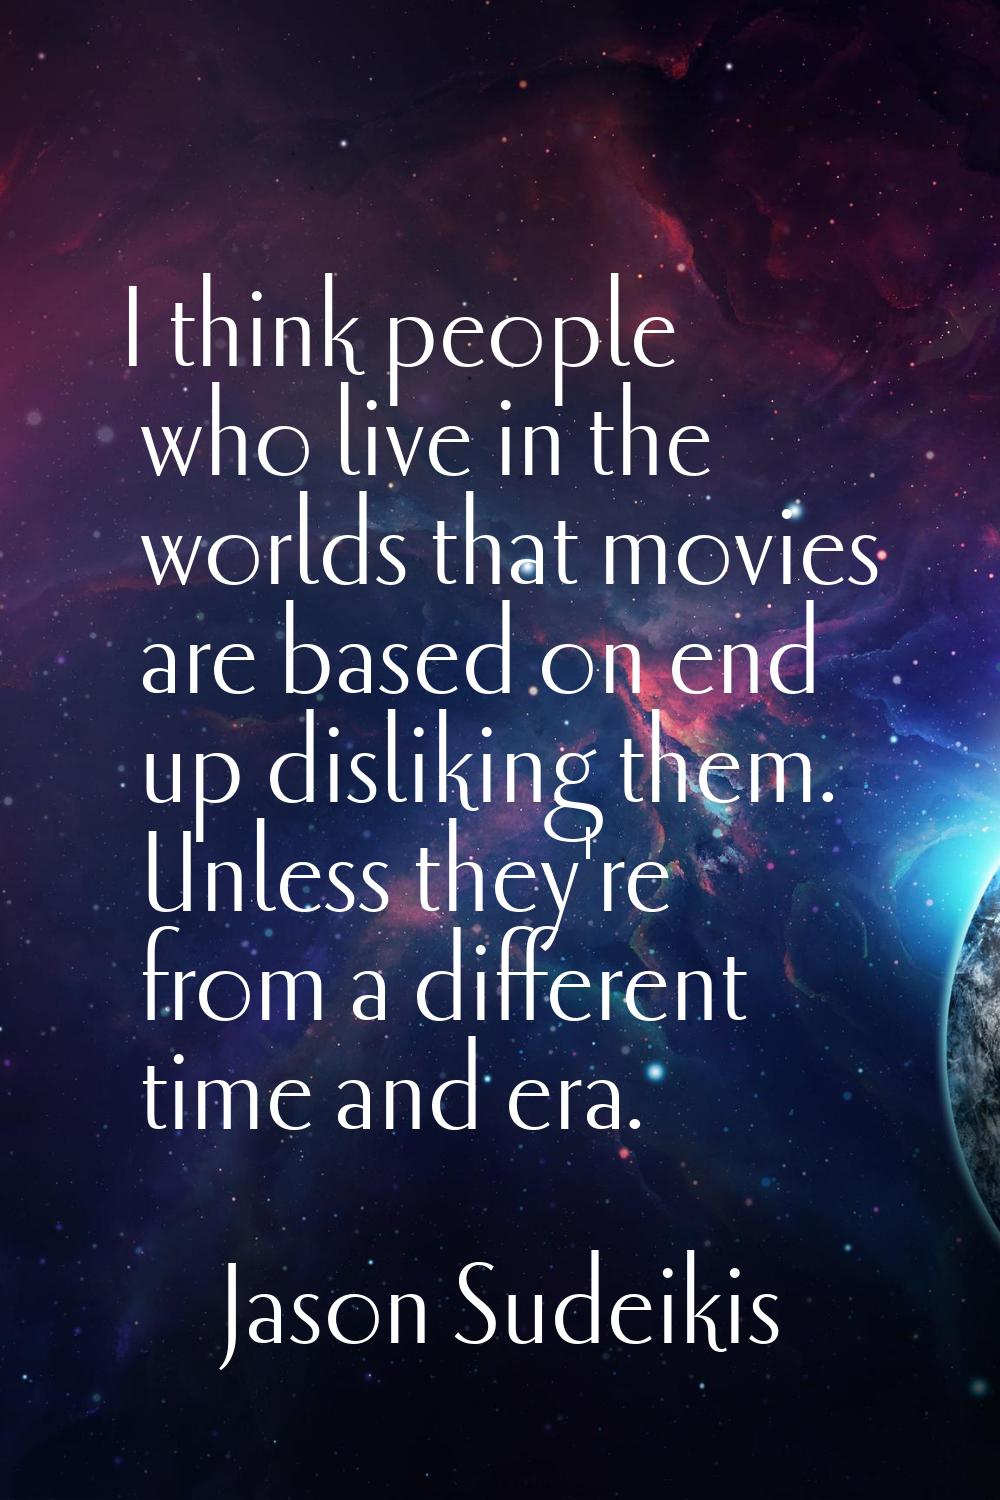 I think people who live in the worlds that movies are based on end up disliking them. Unless they'r